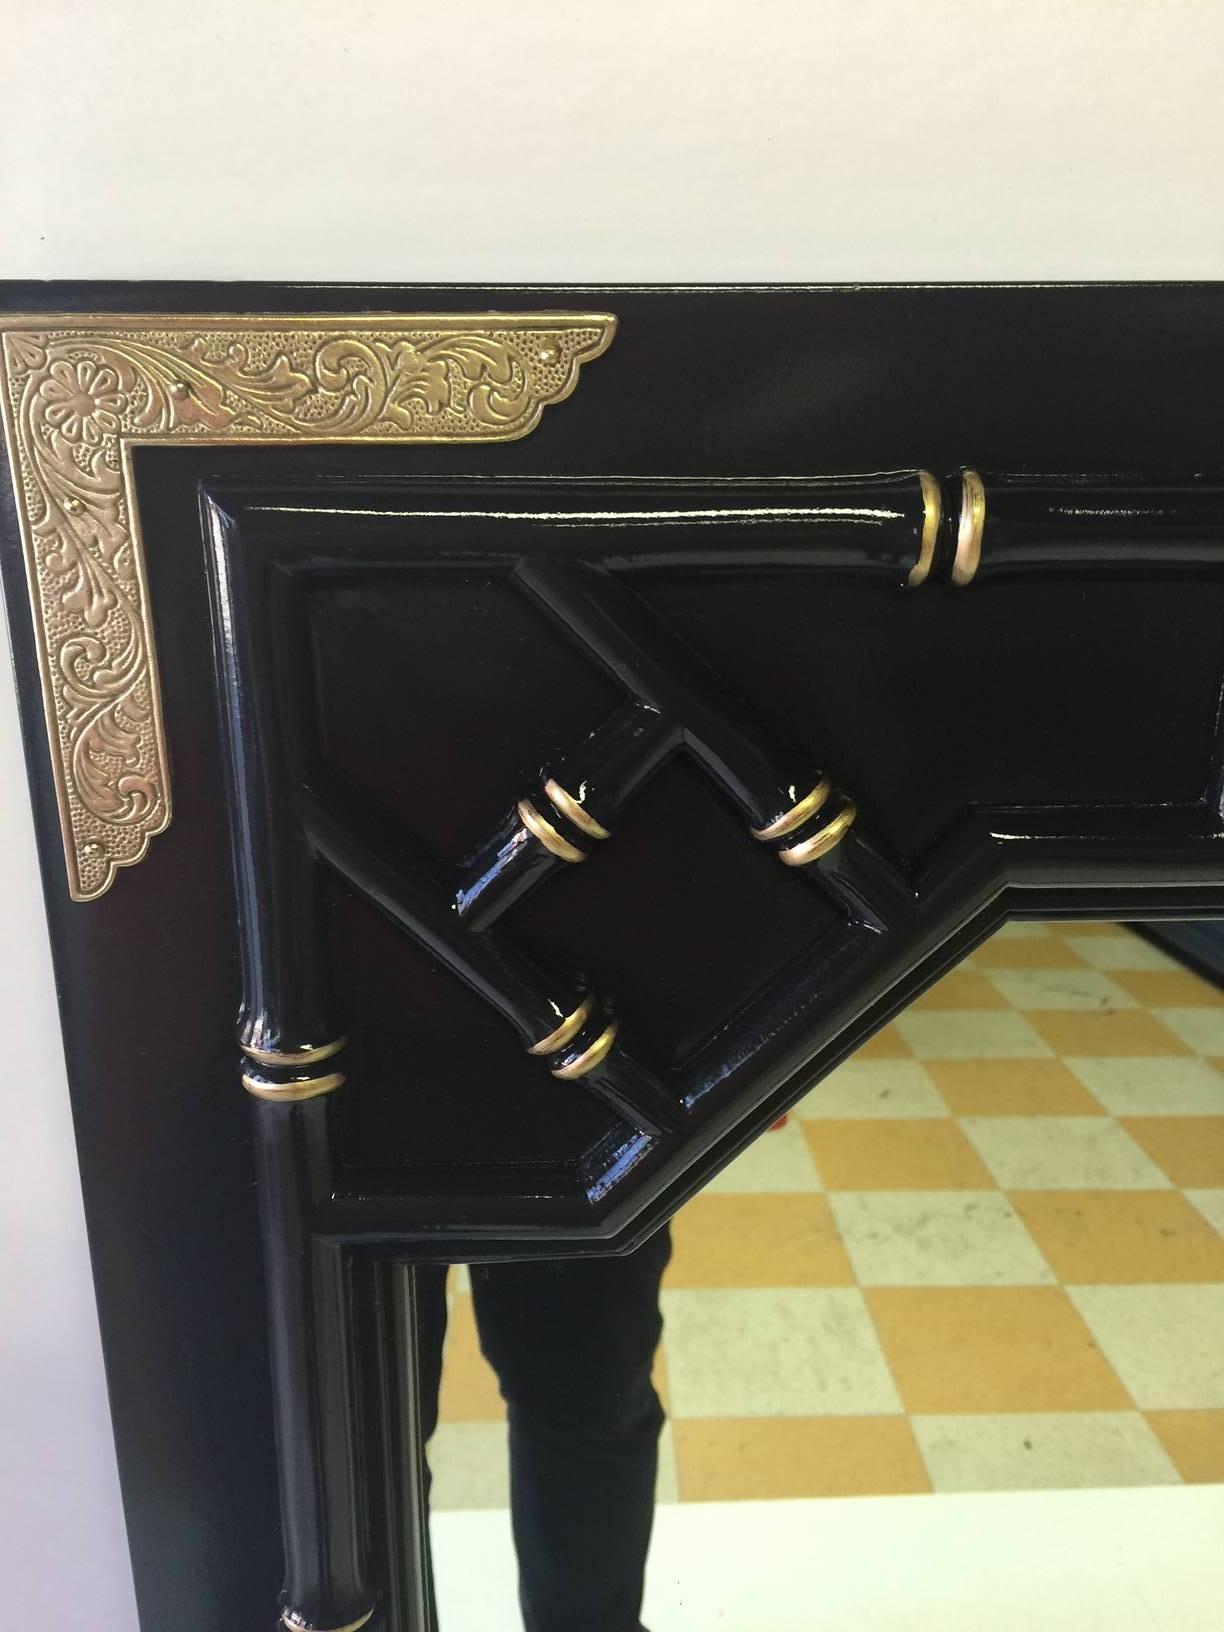 These fabulous mirrors have been lacquered in Contessa's Cape in a high gloss finish. 18-karat gold detailing has been added to bring out the faux bamboo detailing and fretwork. These mirrors have companion listings of a credenza or dresser and a